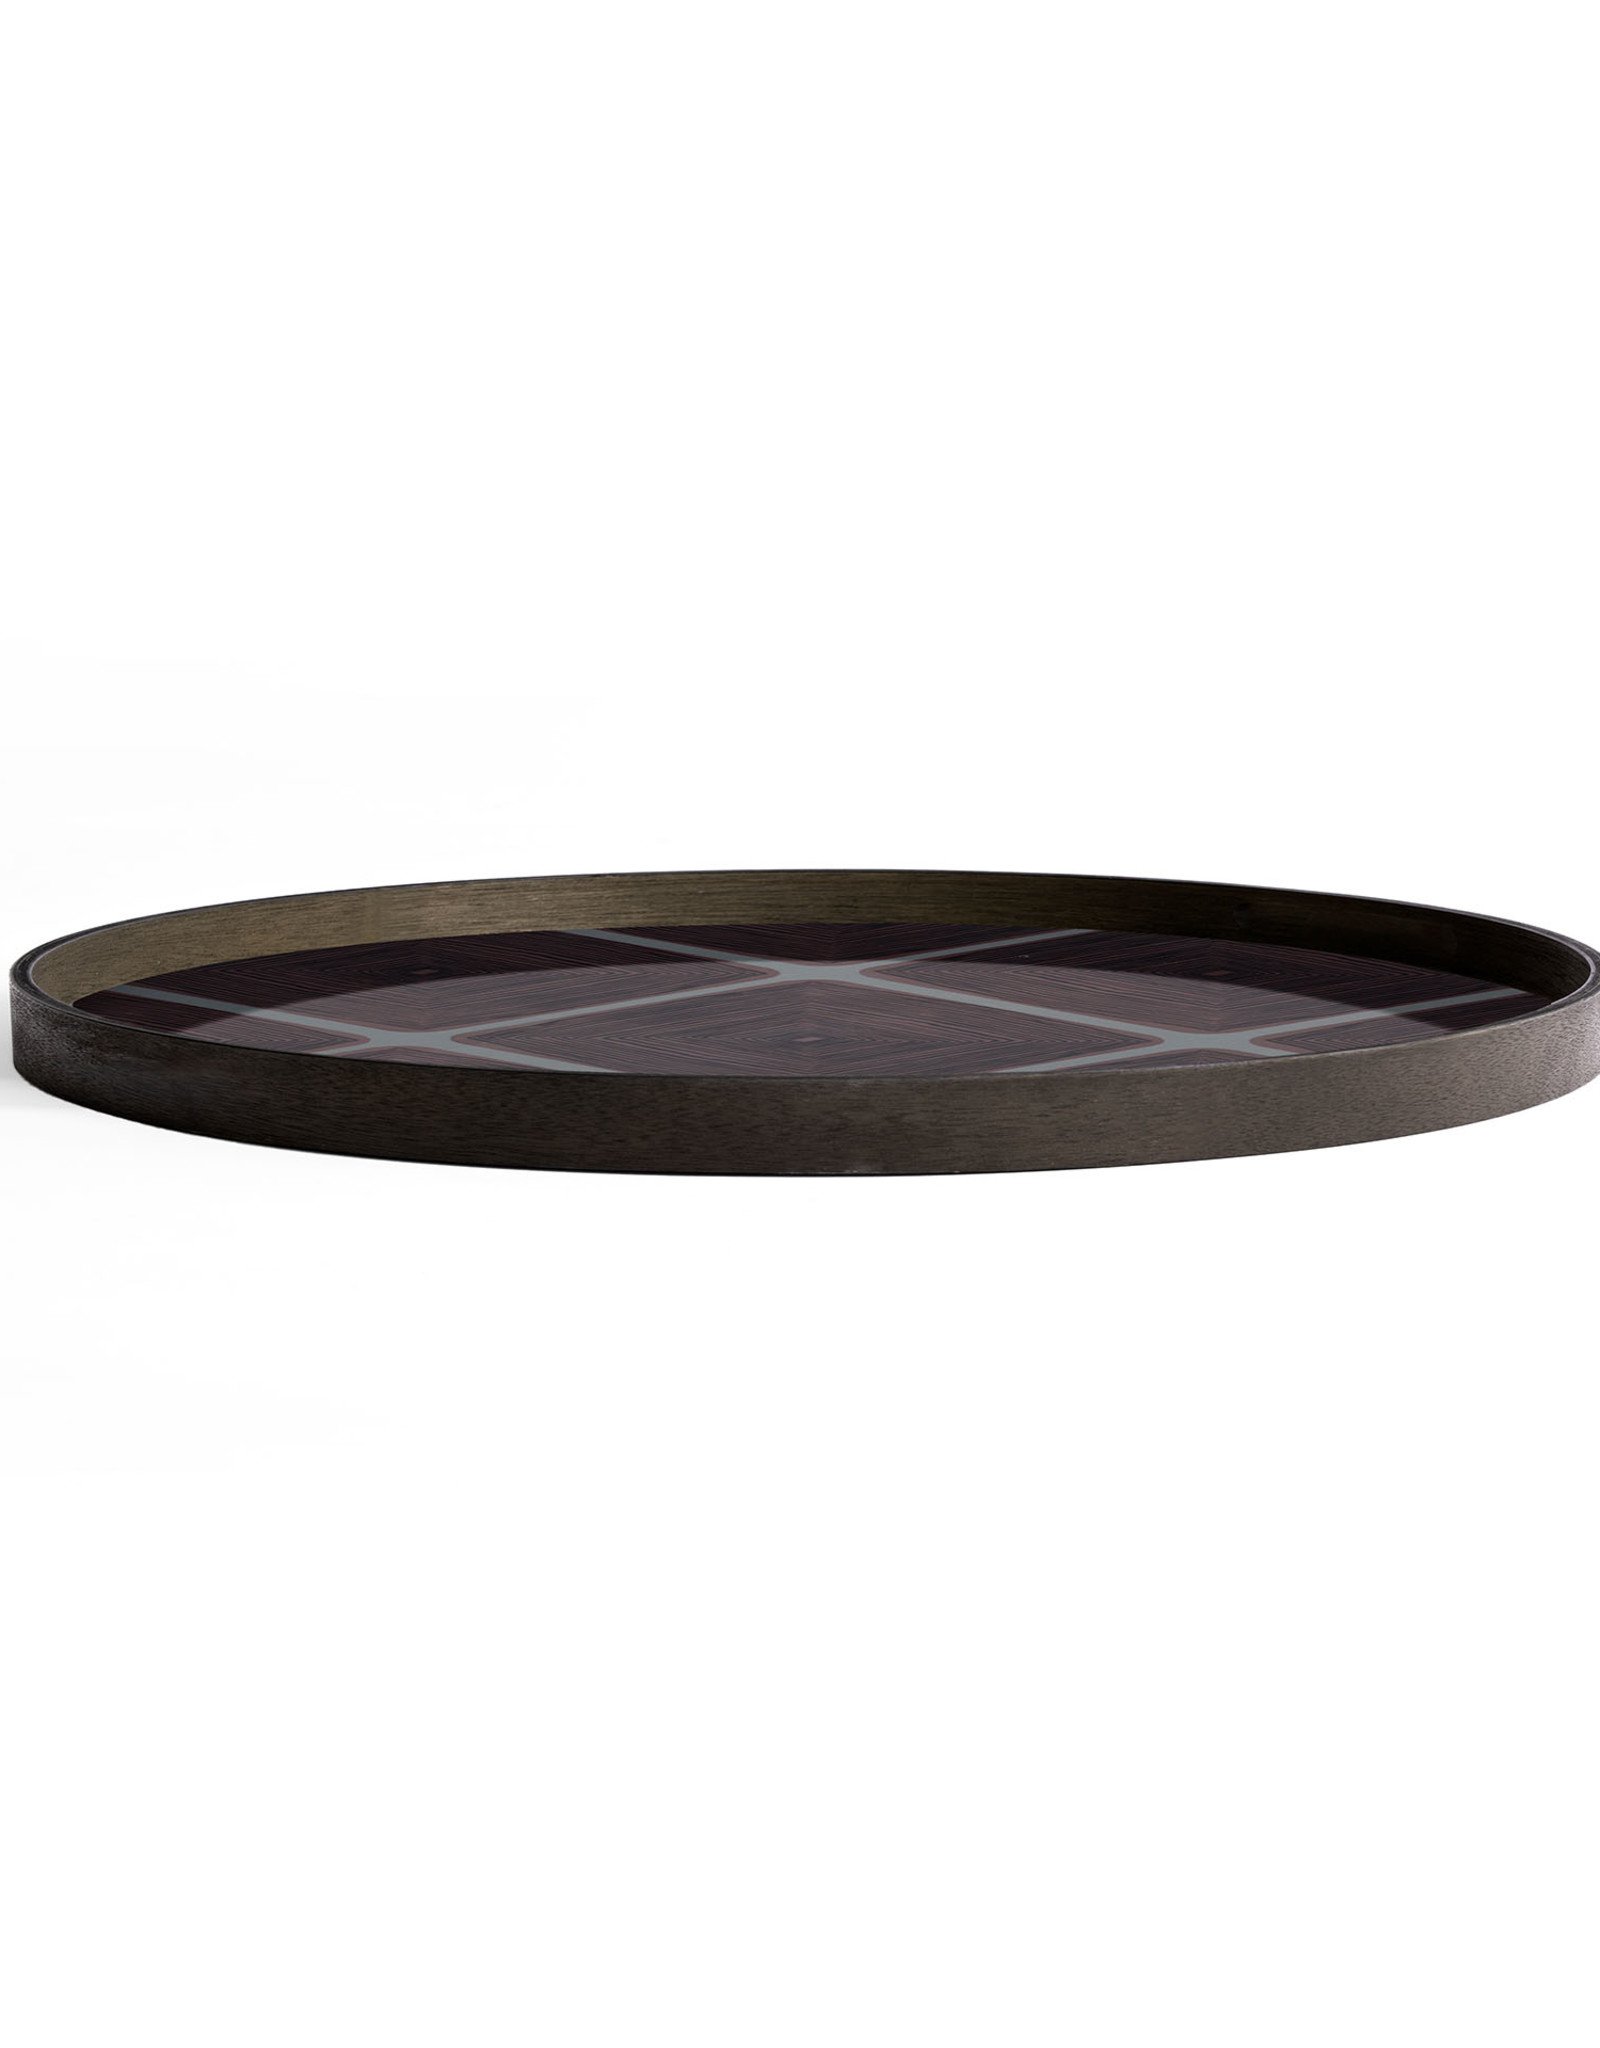 Slate Linear Squares glass tray - round - XL